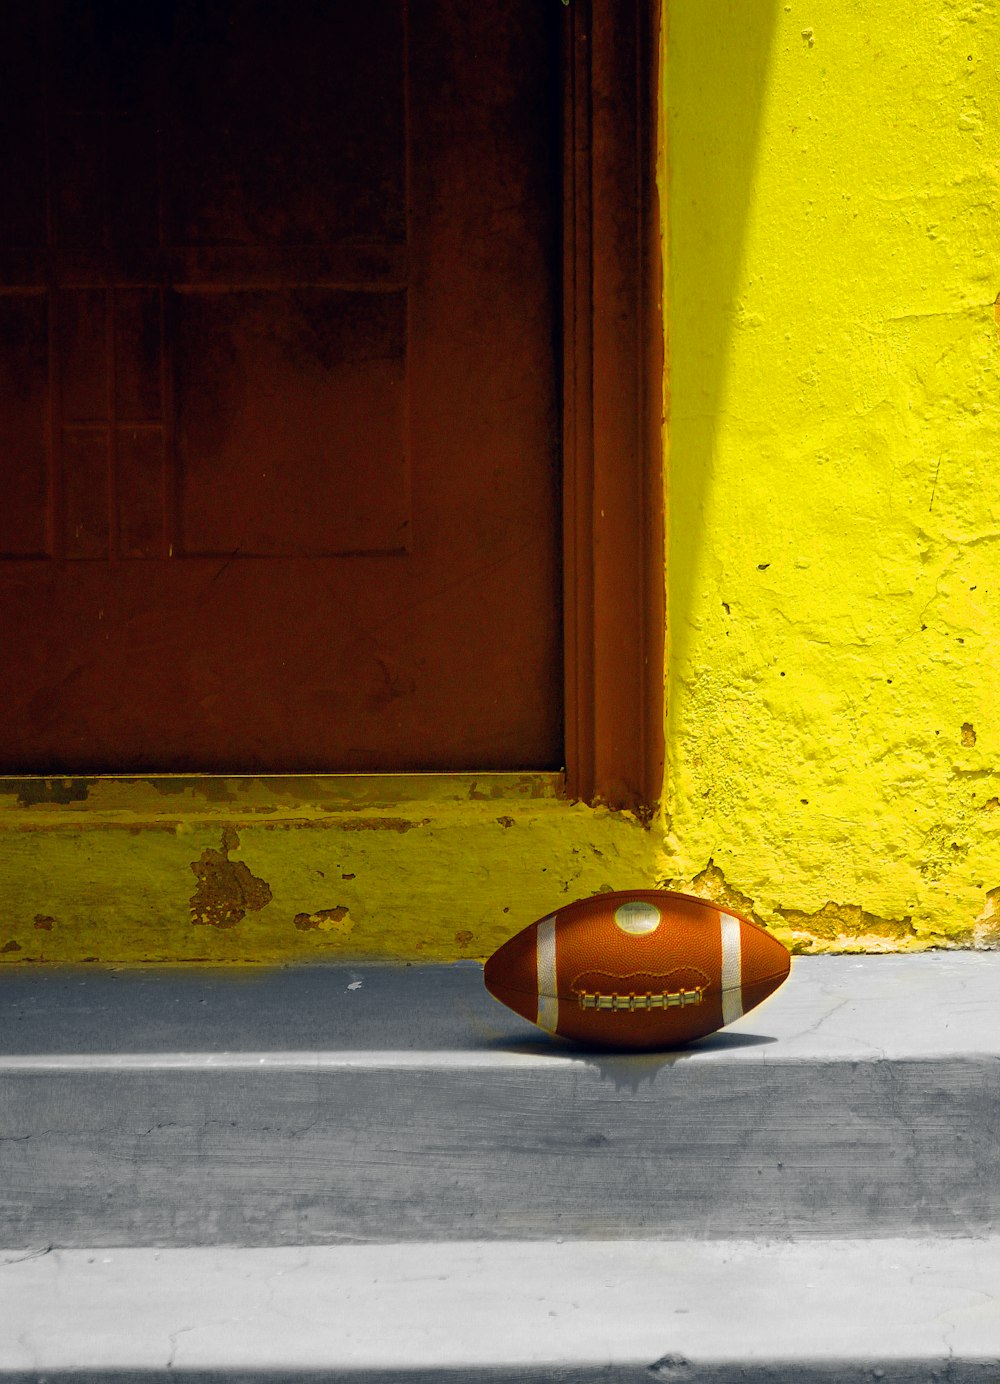 a football laying on the ground in front of a door